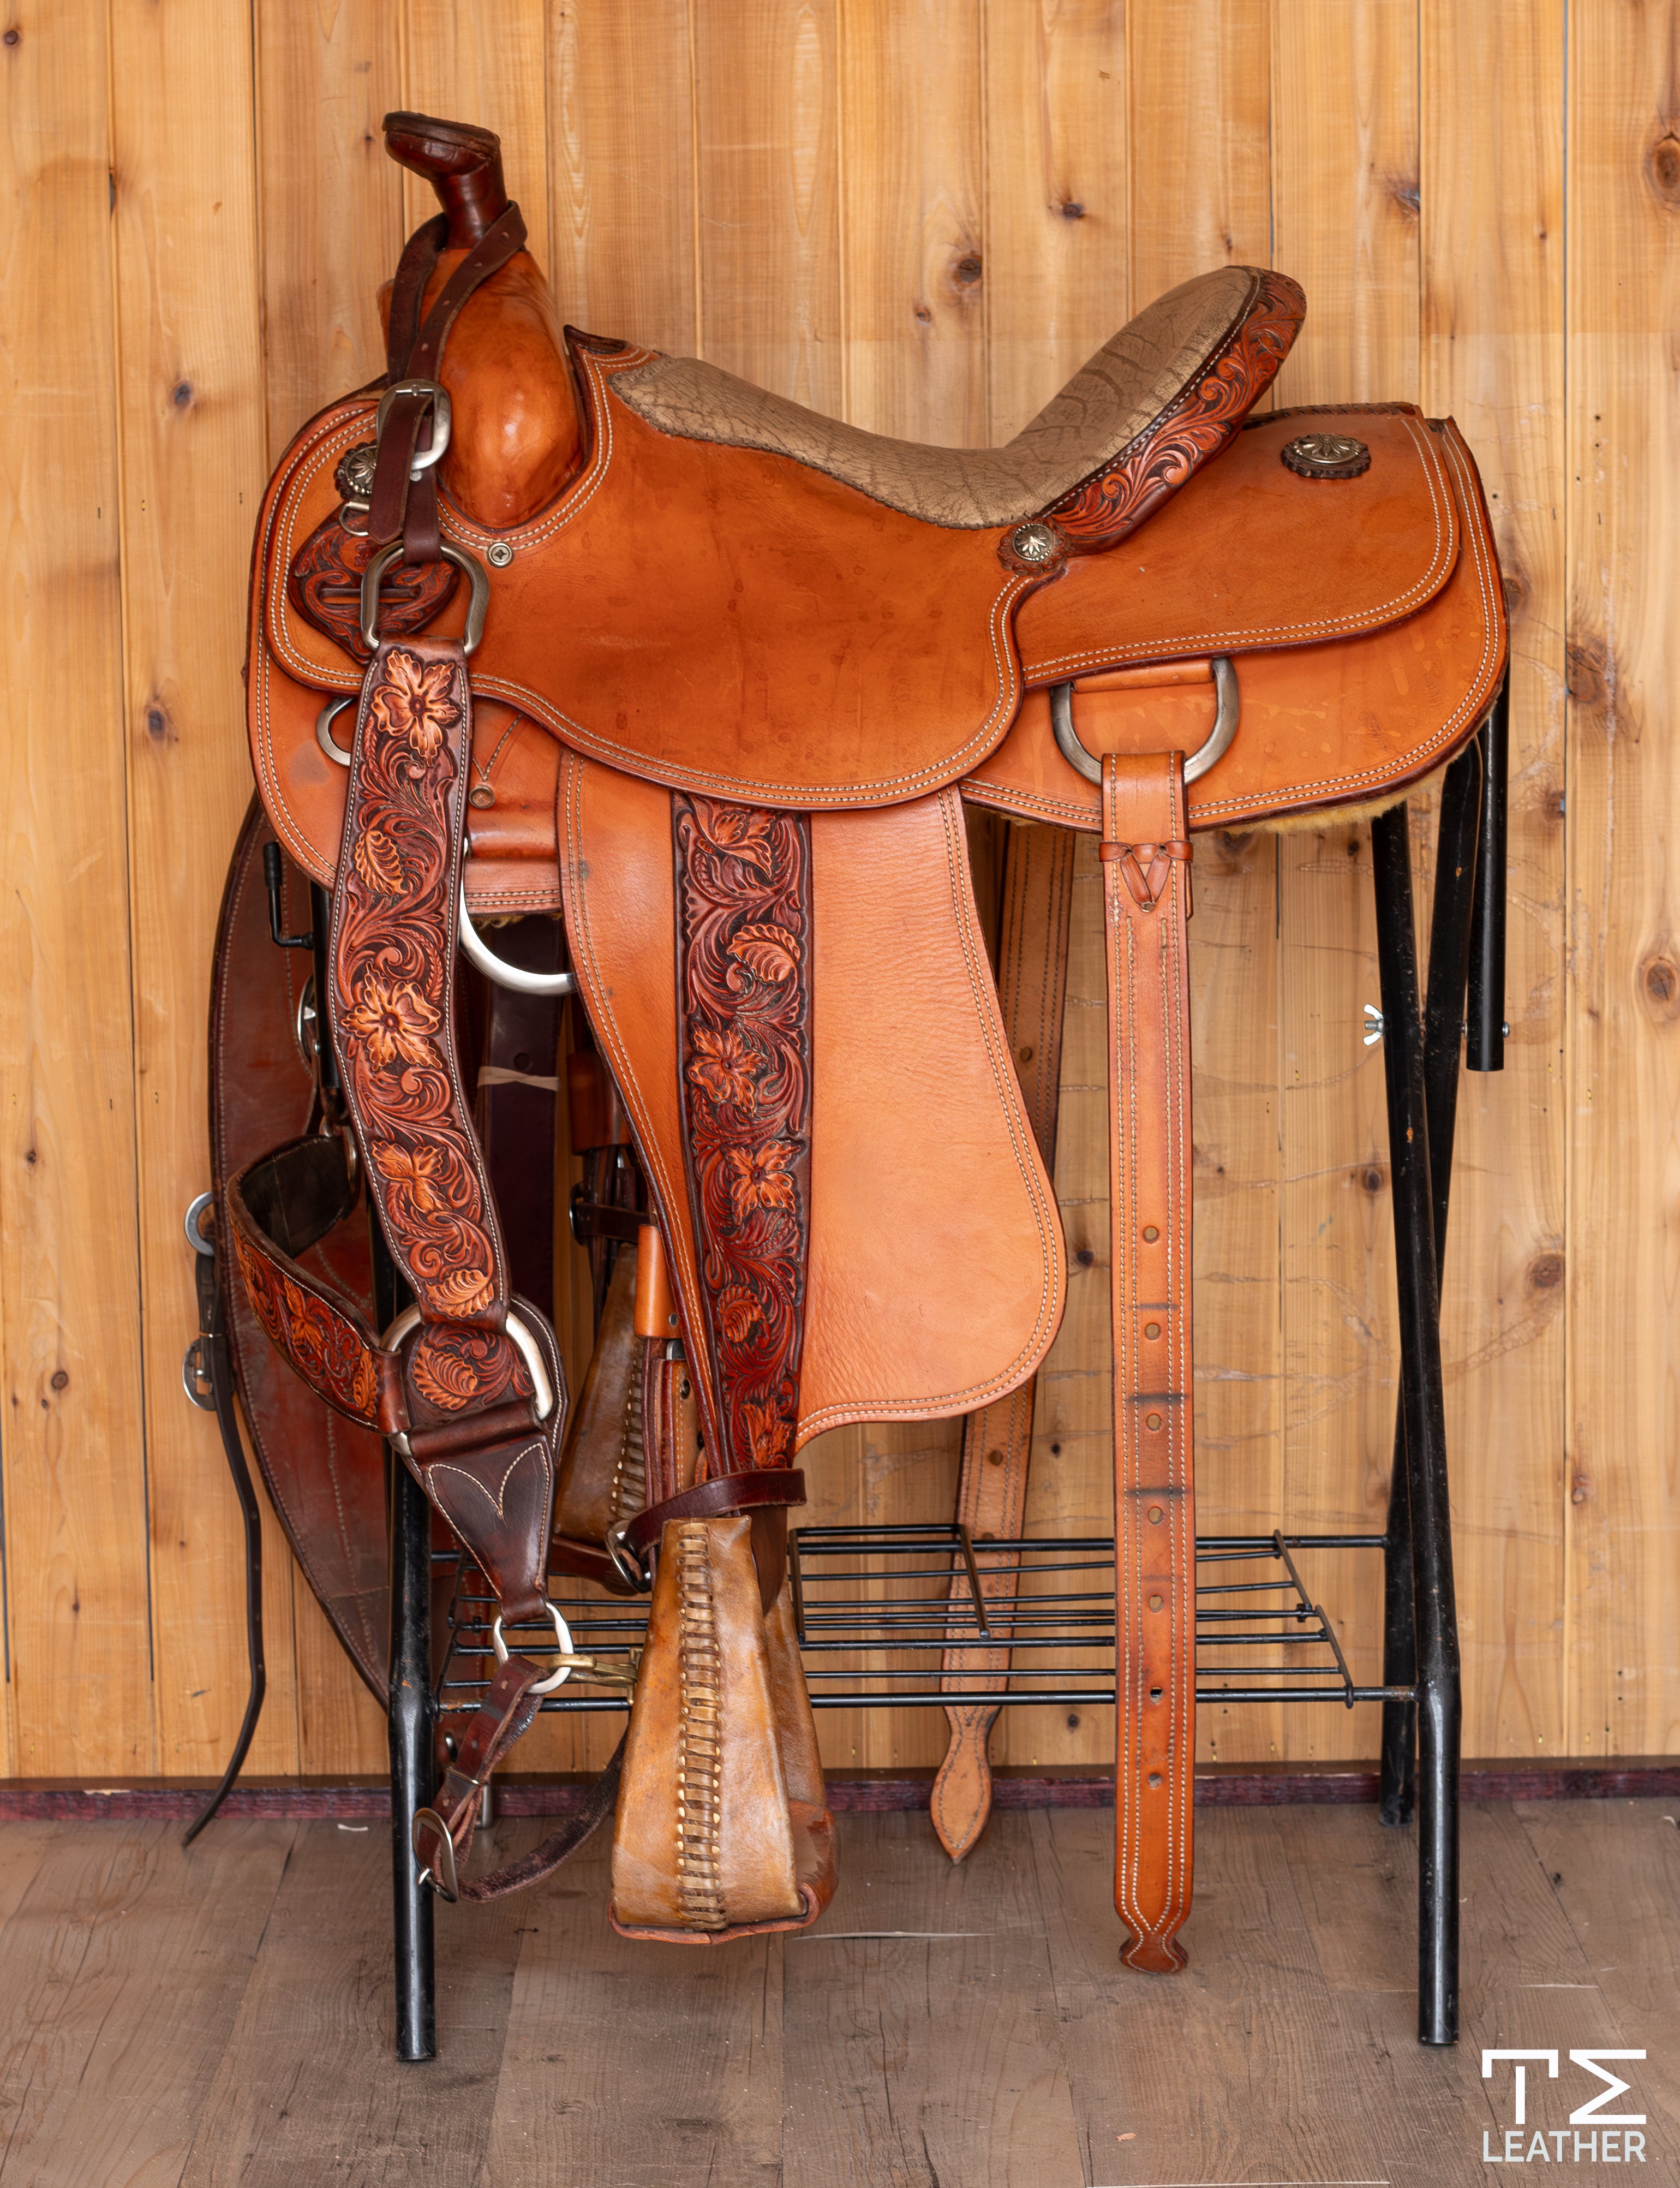 Team Roper Saddle 14.5" Smooth Natural Floral Two-Toned w/ Elephant Seat (USED)